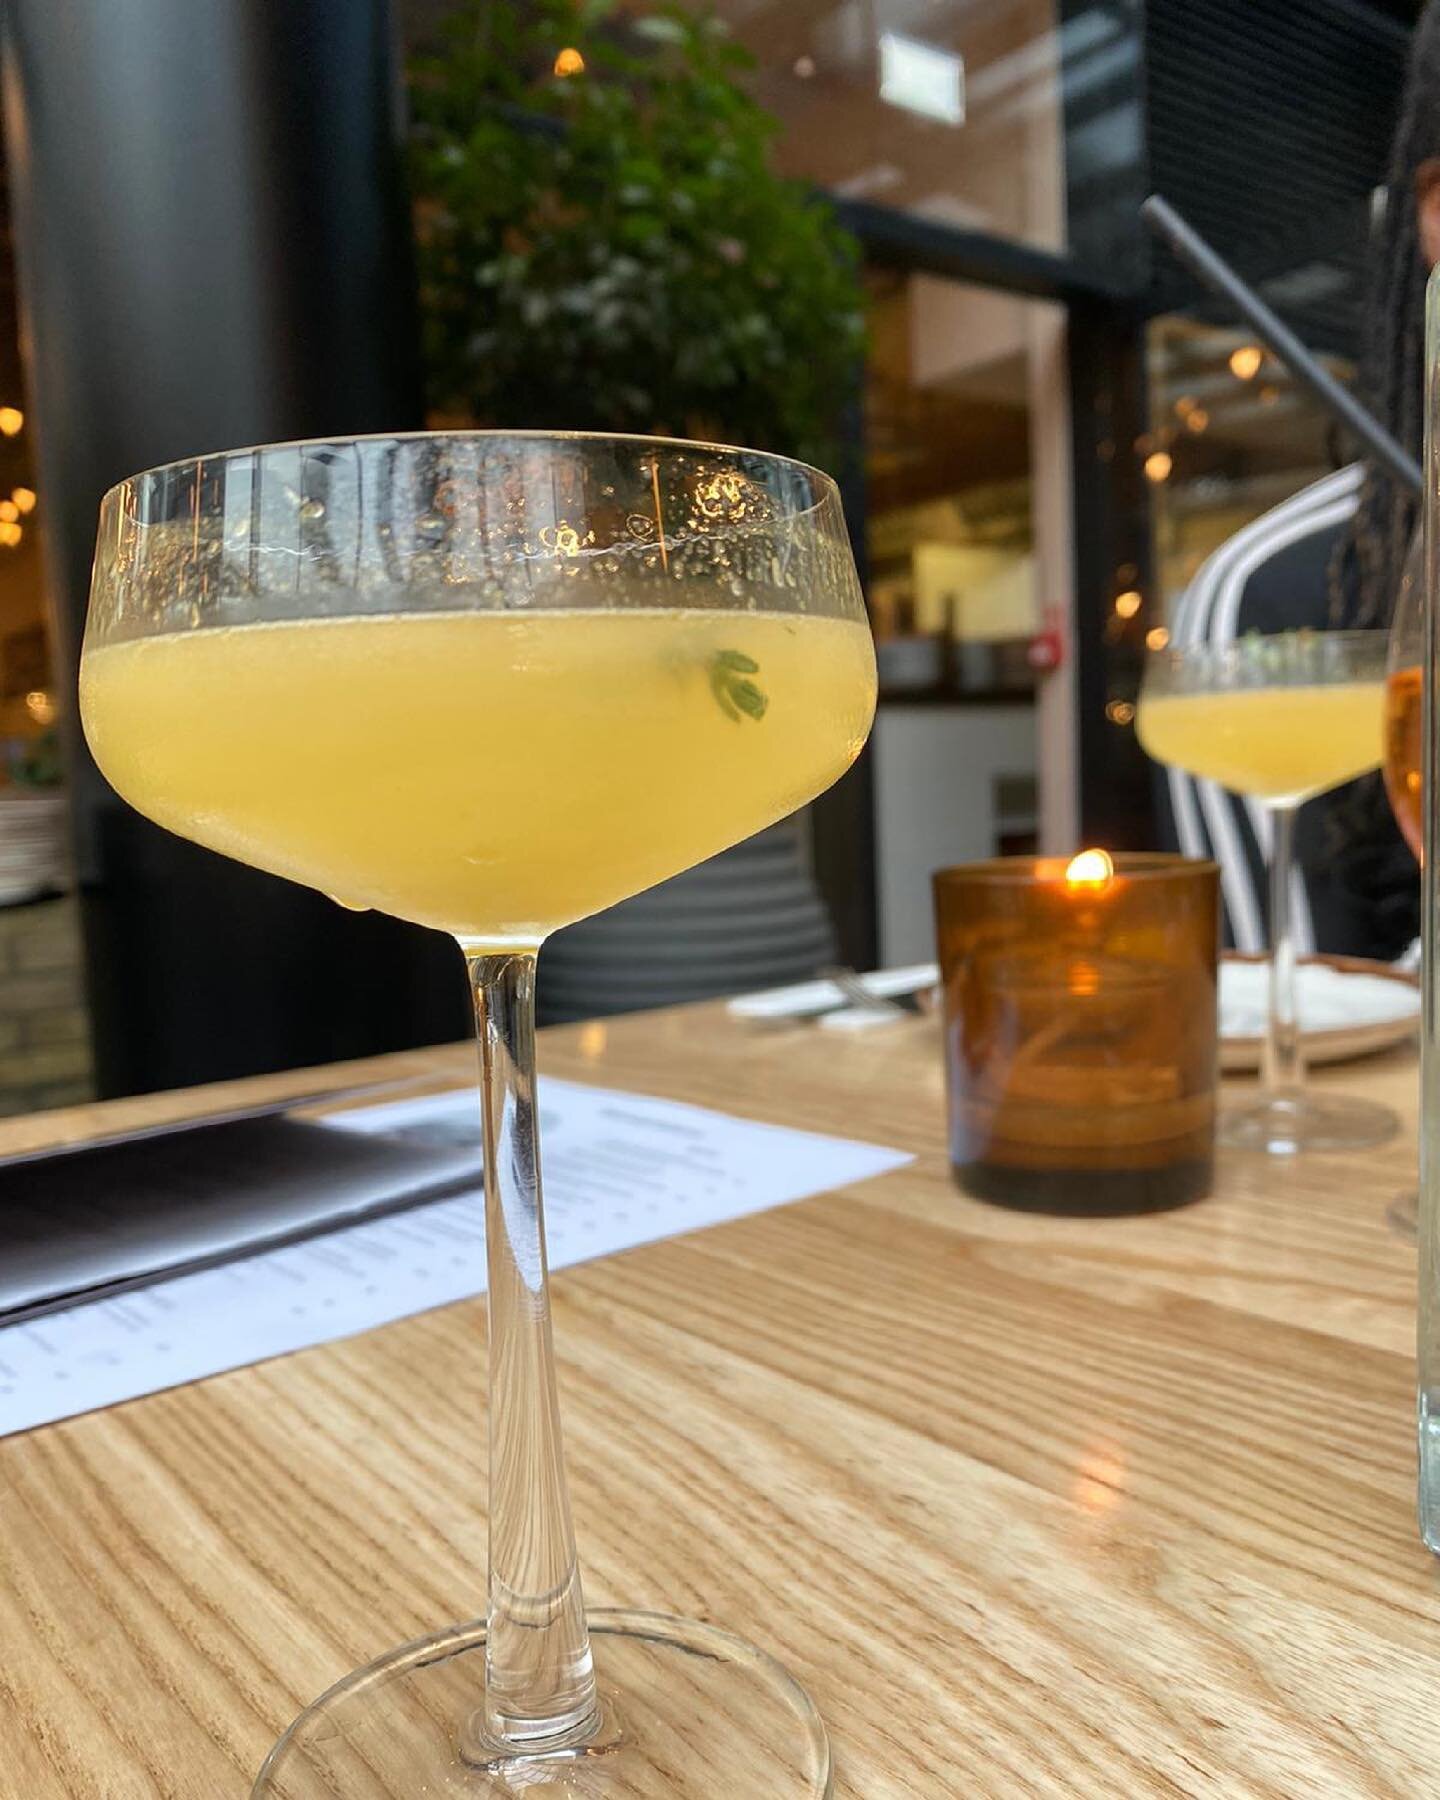 Easing out of lockdown with a round of @brothermarcus_ Portokali (Streamertail, Clementine, Orange &amp; Thyme honey).
.
This is what we&rsquo;ve been missing over the last year.
.
.
#cocktail #cocktails #londonfood #londonfoodie #rum #daiquiri #chee